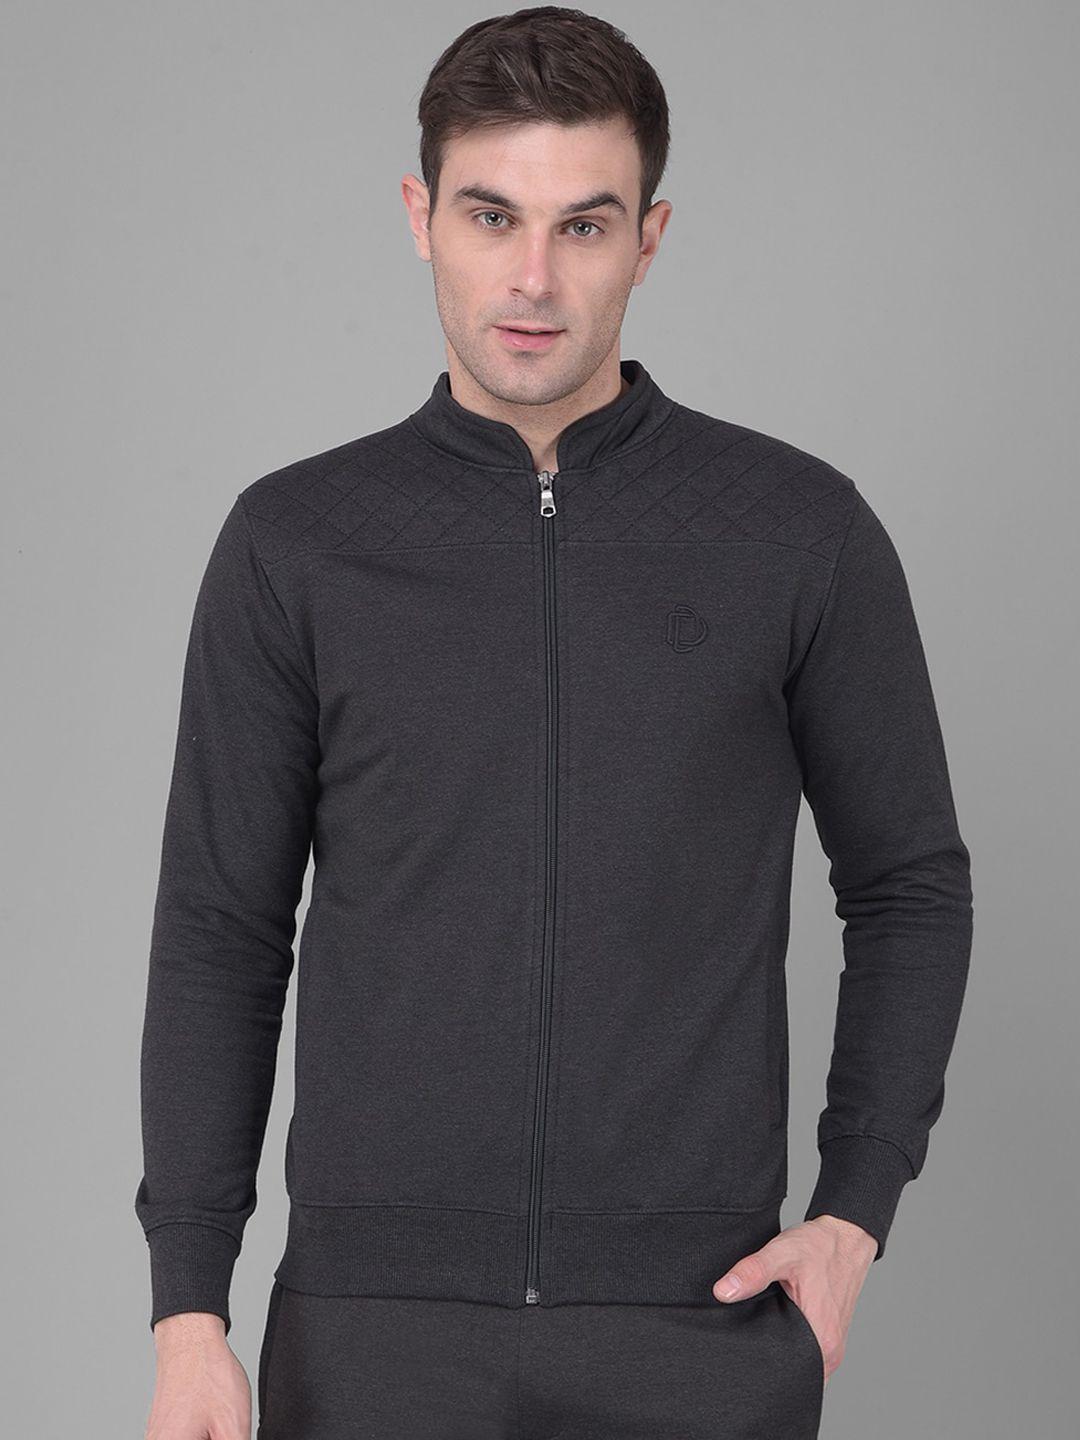 Dollar Lightweight Antimicrobial Cotton Sporty Jacket